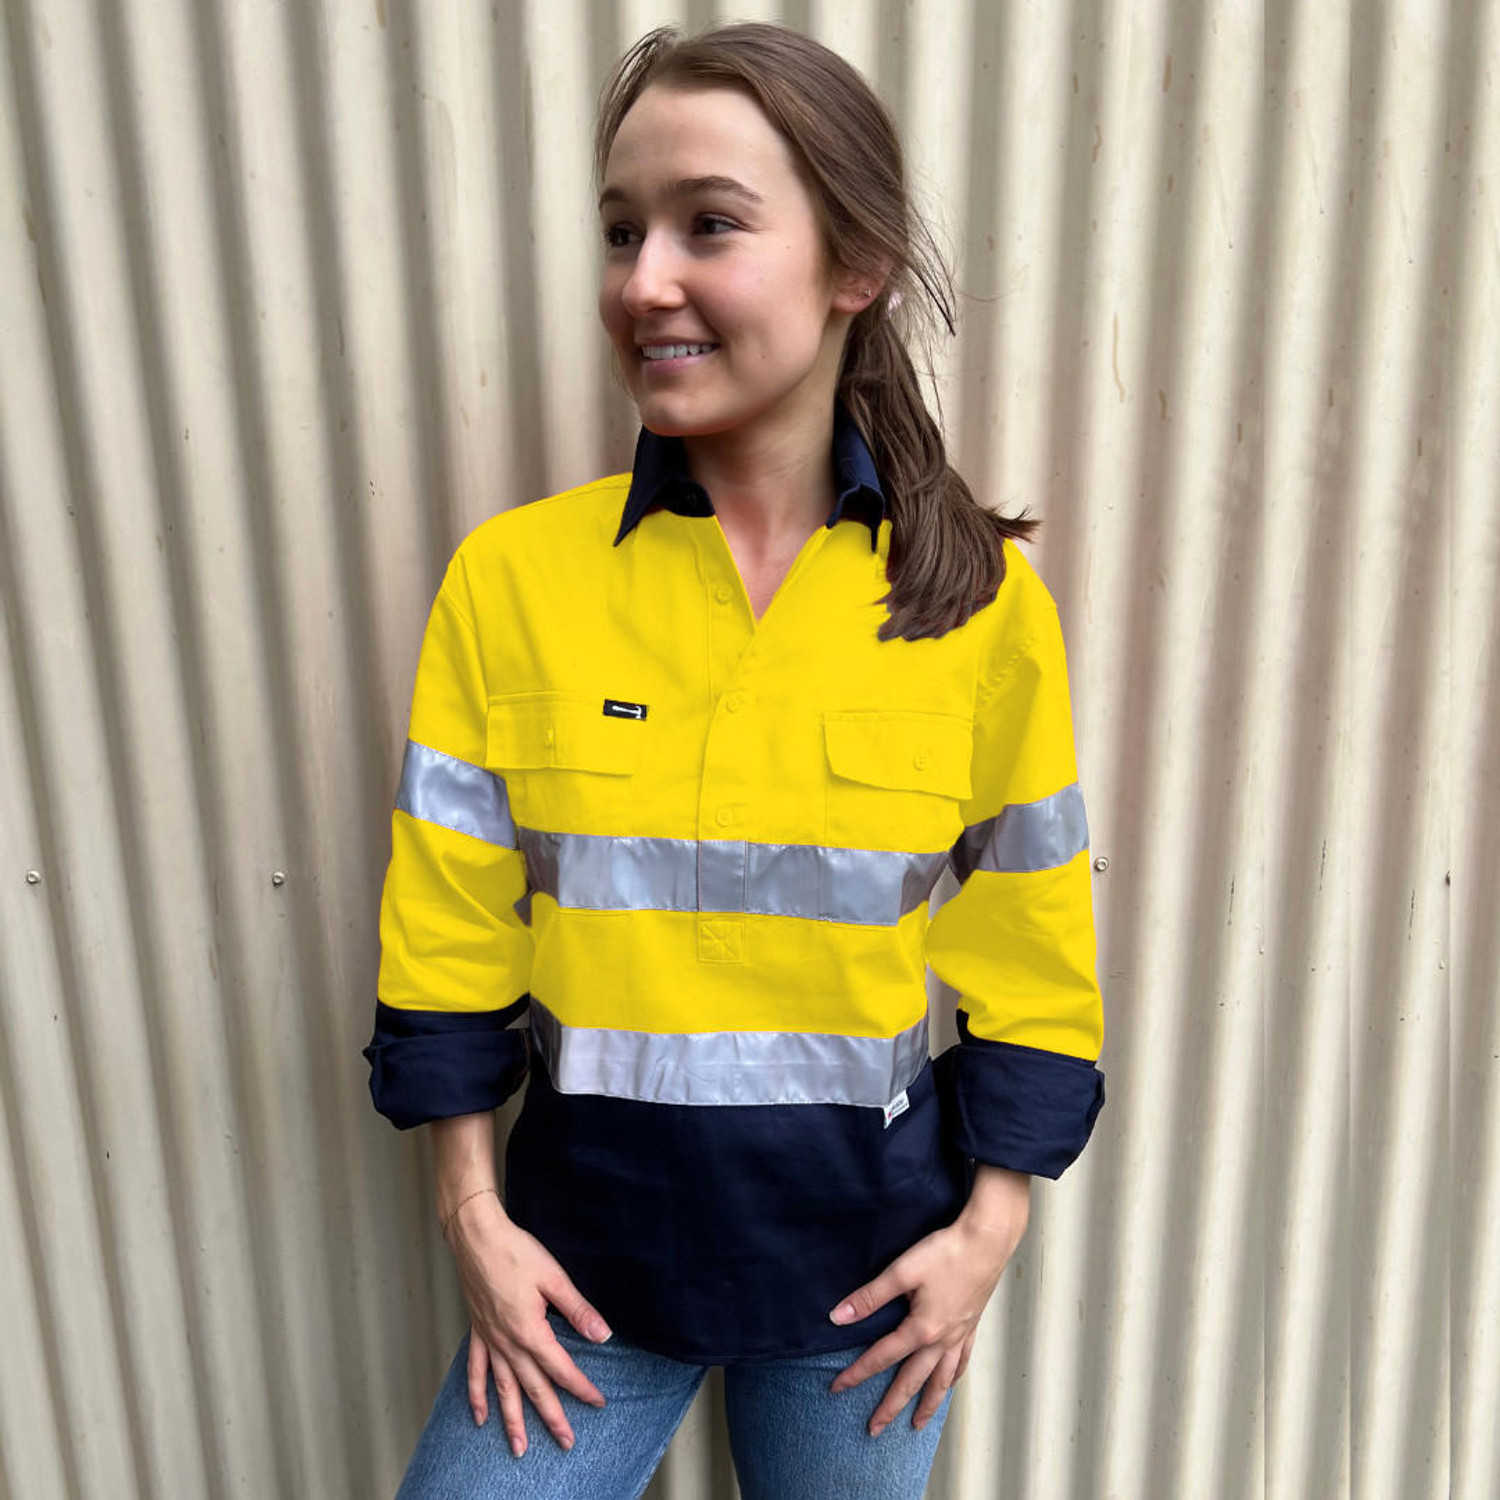  Hammer and Needle Ladies Cotton Drill Long Sleeve/Closed Front Hi-Vis + Reflective Tape Work shirt in Yellow/Navy (Bulk Deal Buy 4+ for $64.95 each) 